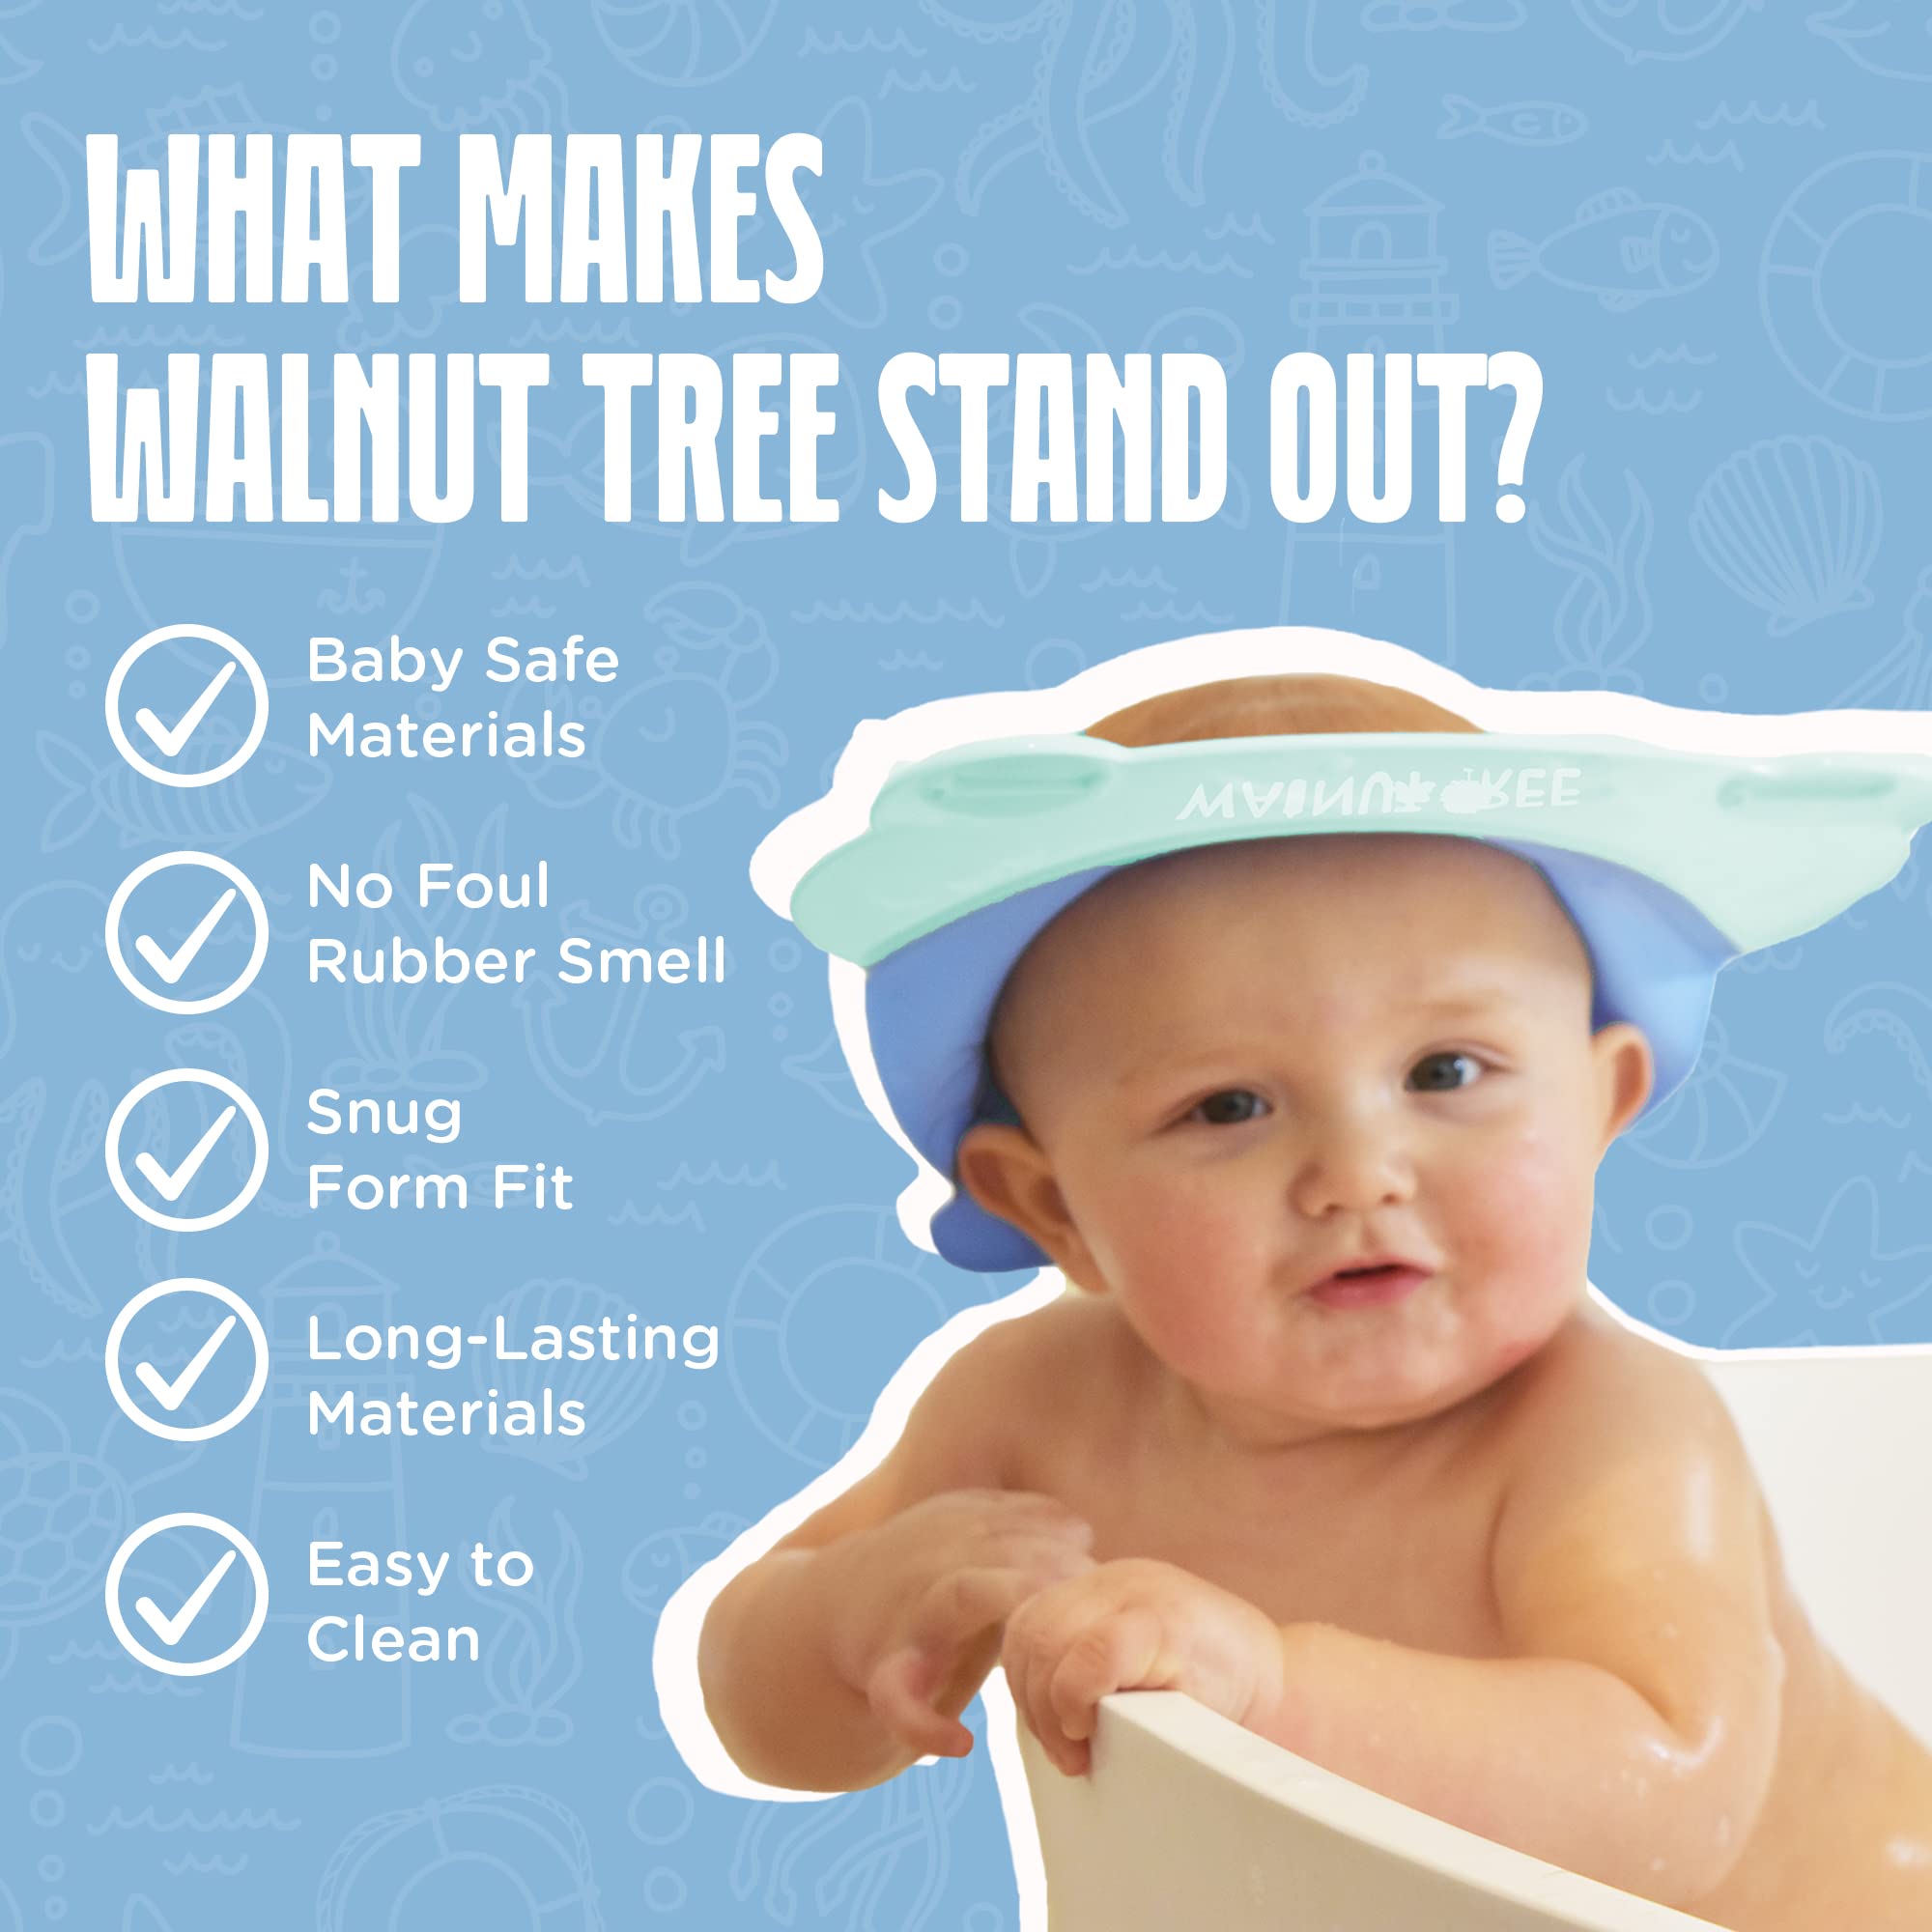 Walnut Tree Infant Love Baby Essential Shower Cap Hat | Baby Bath Head Cap Visor for Washing Hair - USA Pediatricians Recommended Shower Protection [11 MONTHS OLD+ RECOMMENDED] (Sky Blue)